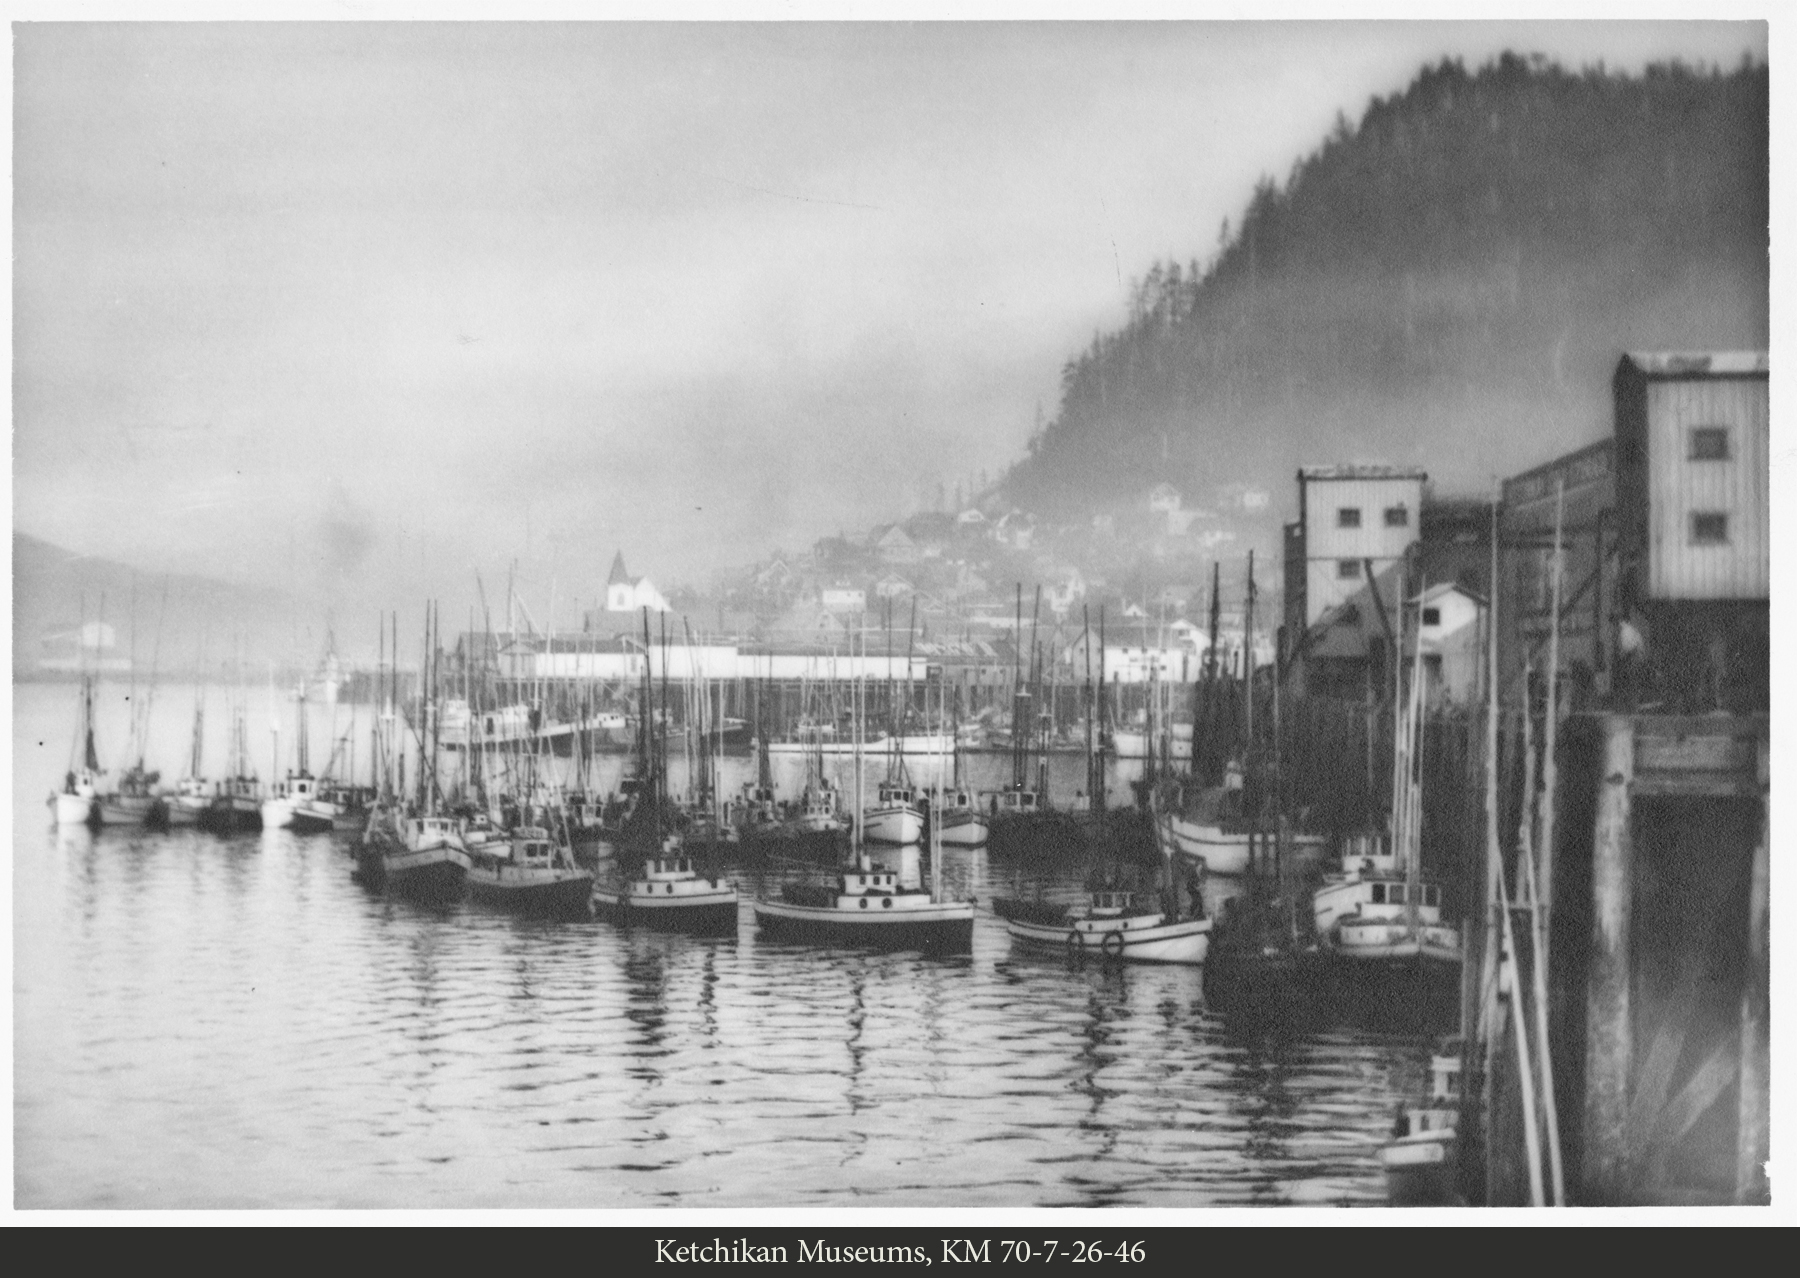 Trollers strung out at the Ketchikan Cold Storage Company dock